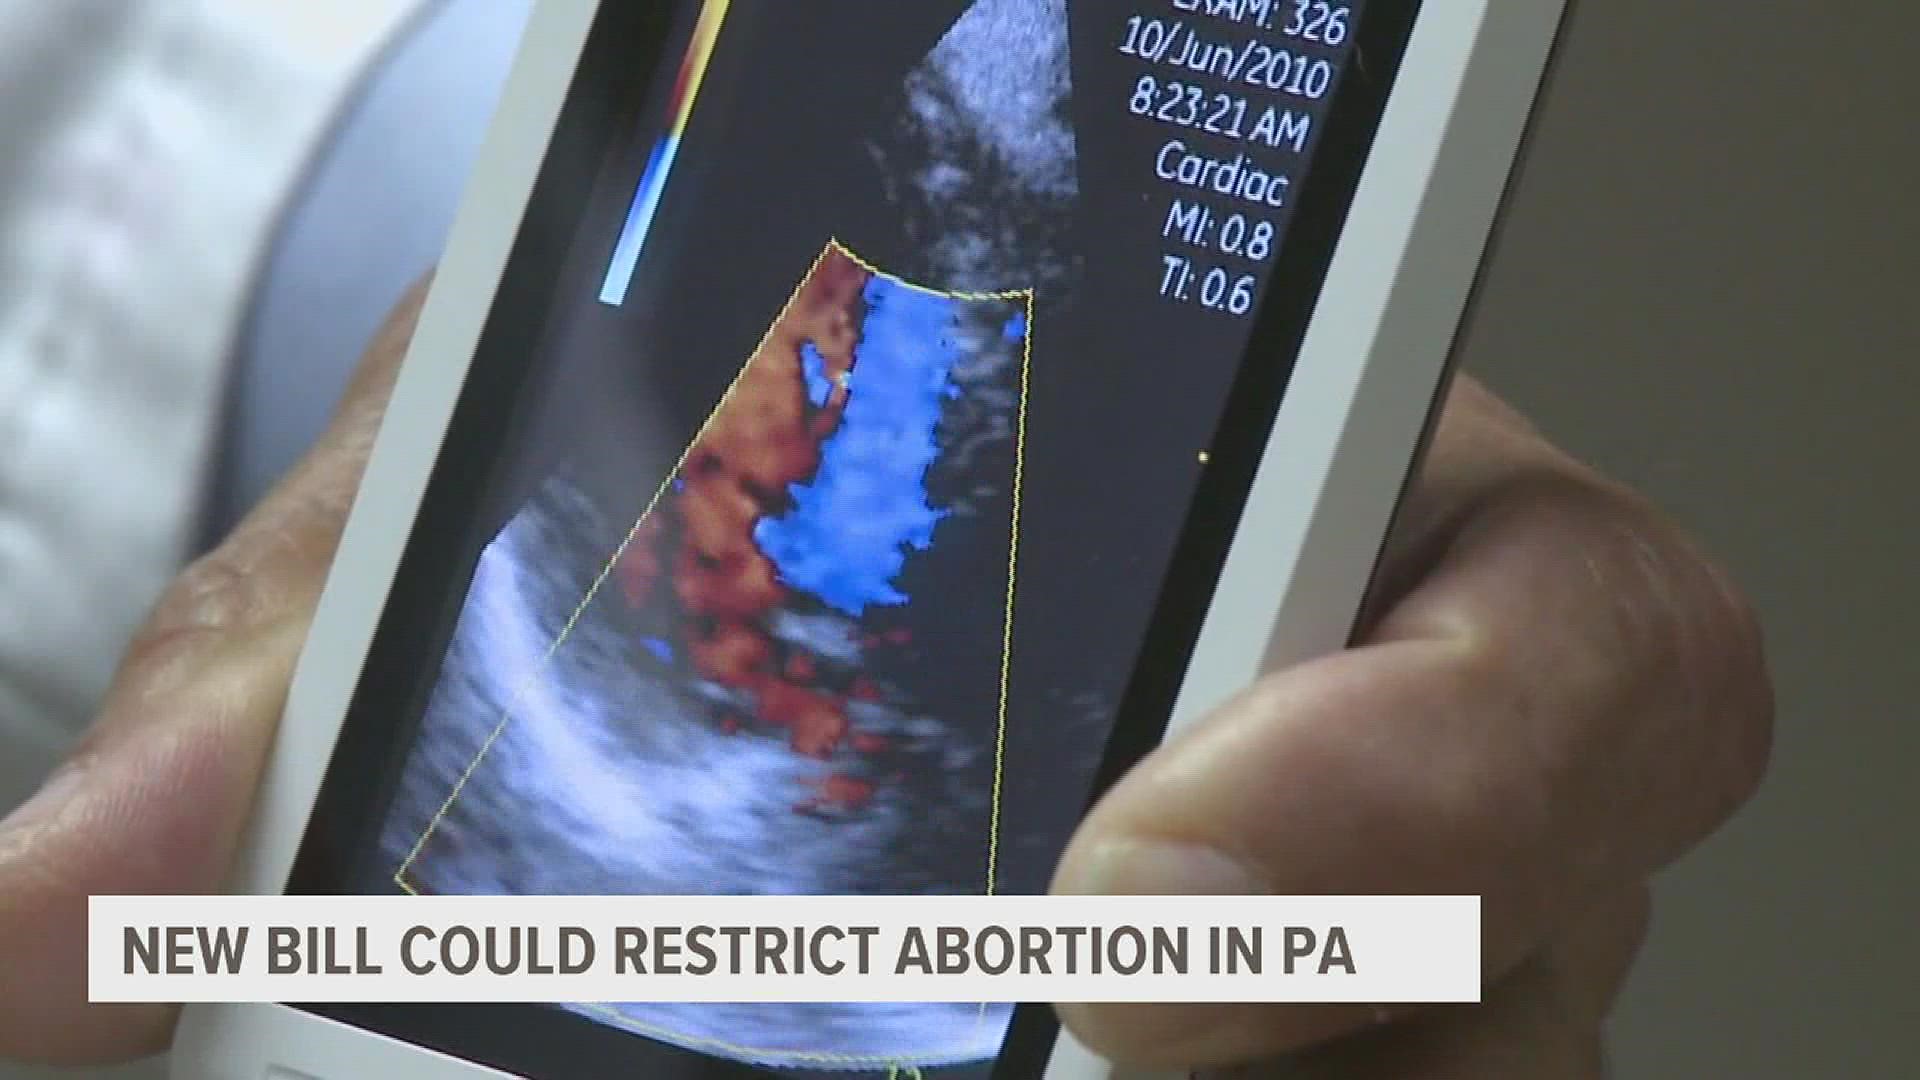 The reversal of Roe v. Wade continues to ripple across Pennsylvania politics.